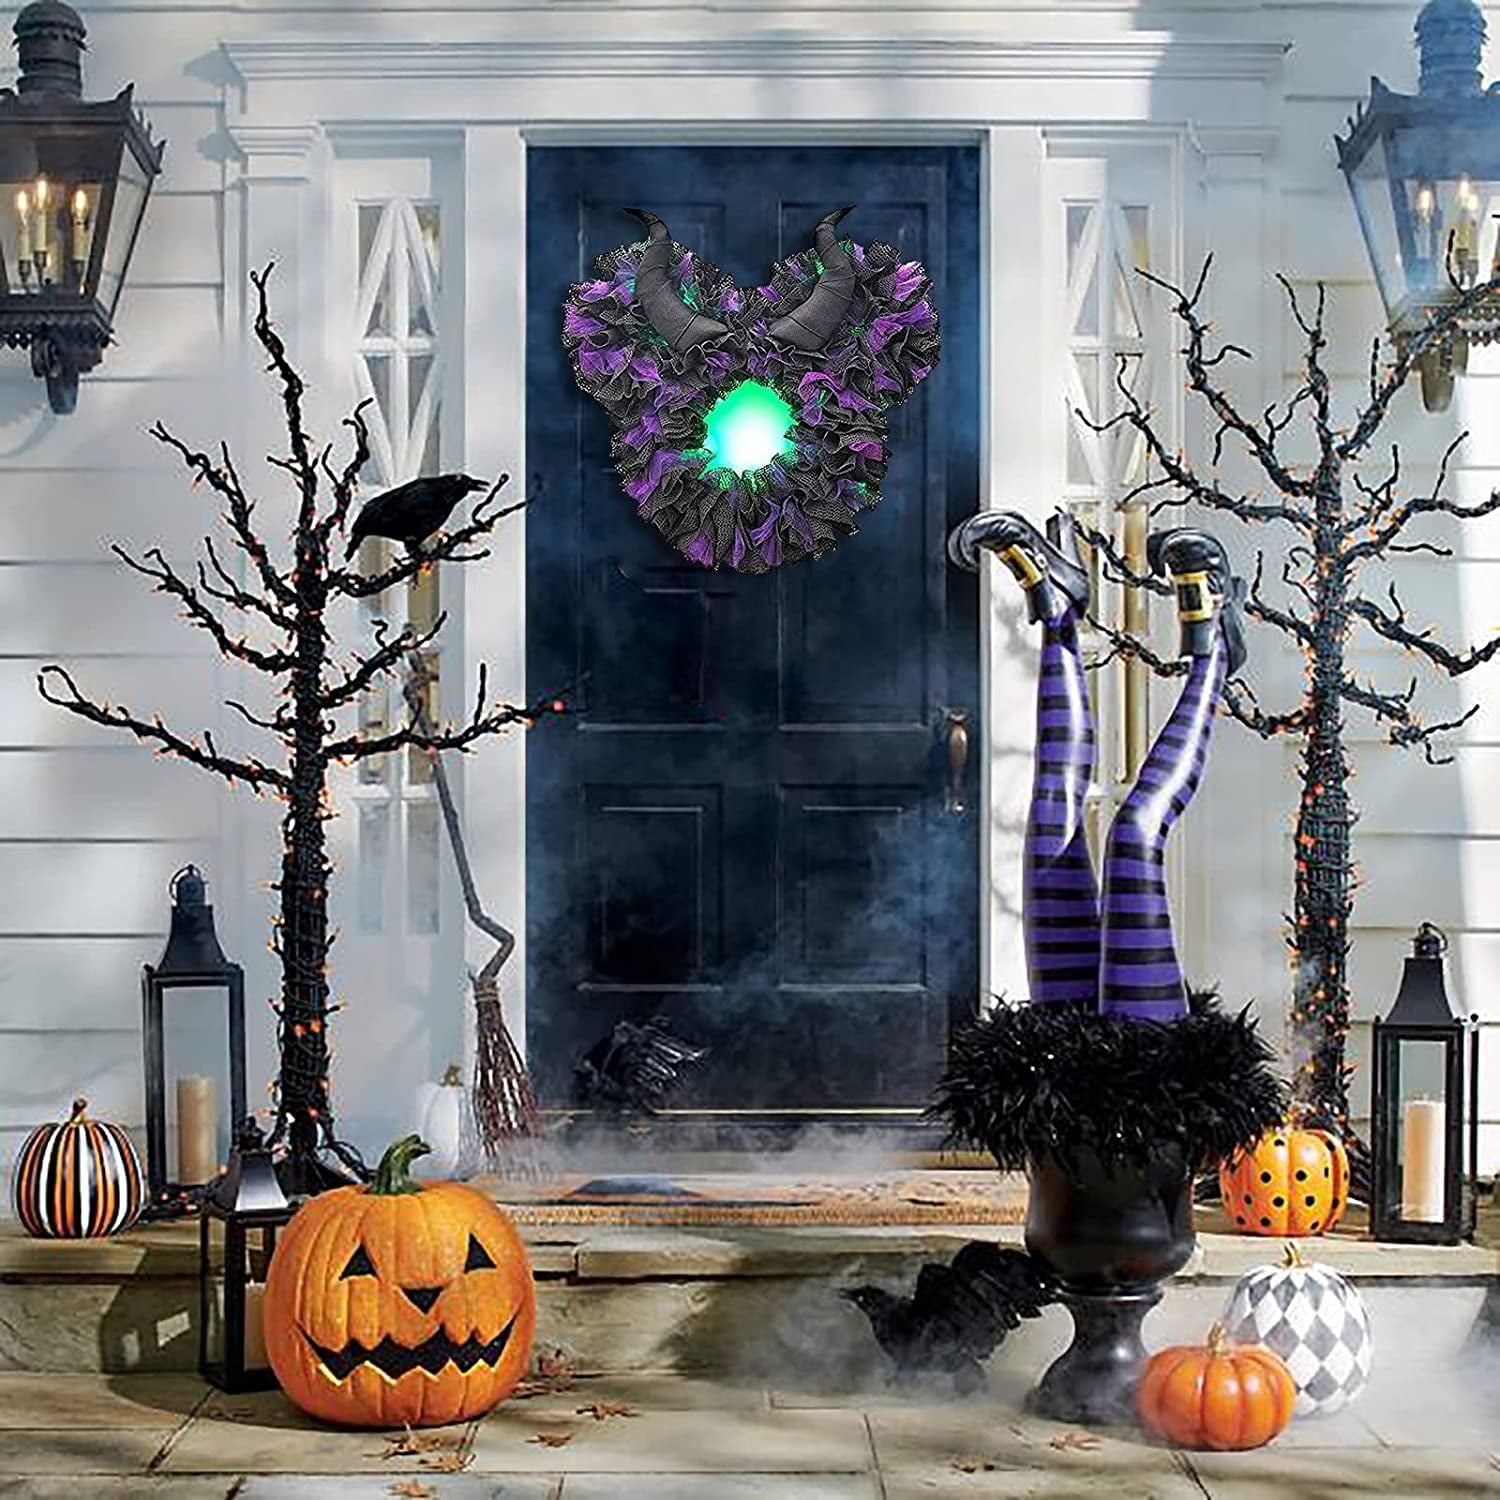 Halloween Mickey Wreath for Front Door Horror Pumpkin Wreath with Clown Decor Main Street USA Inspired Maples Leaves Welcome Wreath Autumns Outdoor Holiday Party Hanging Ornaments Door Decoration